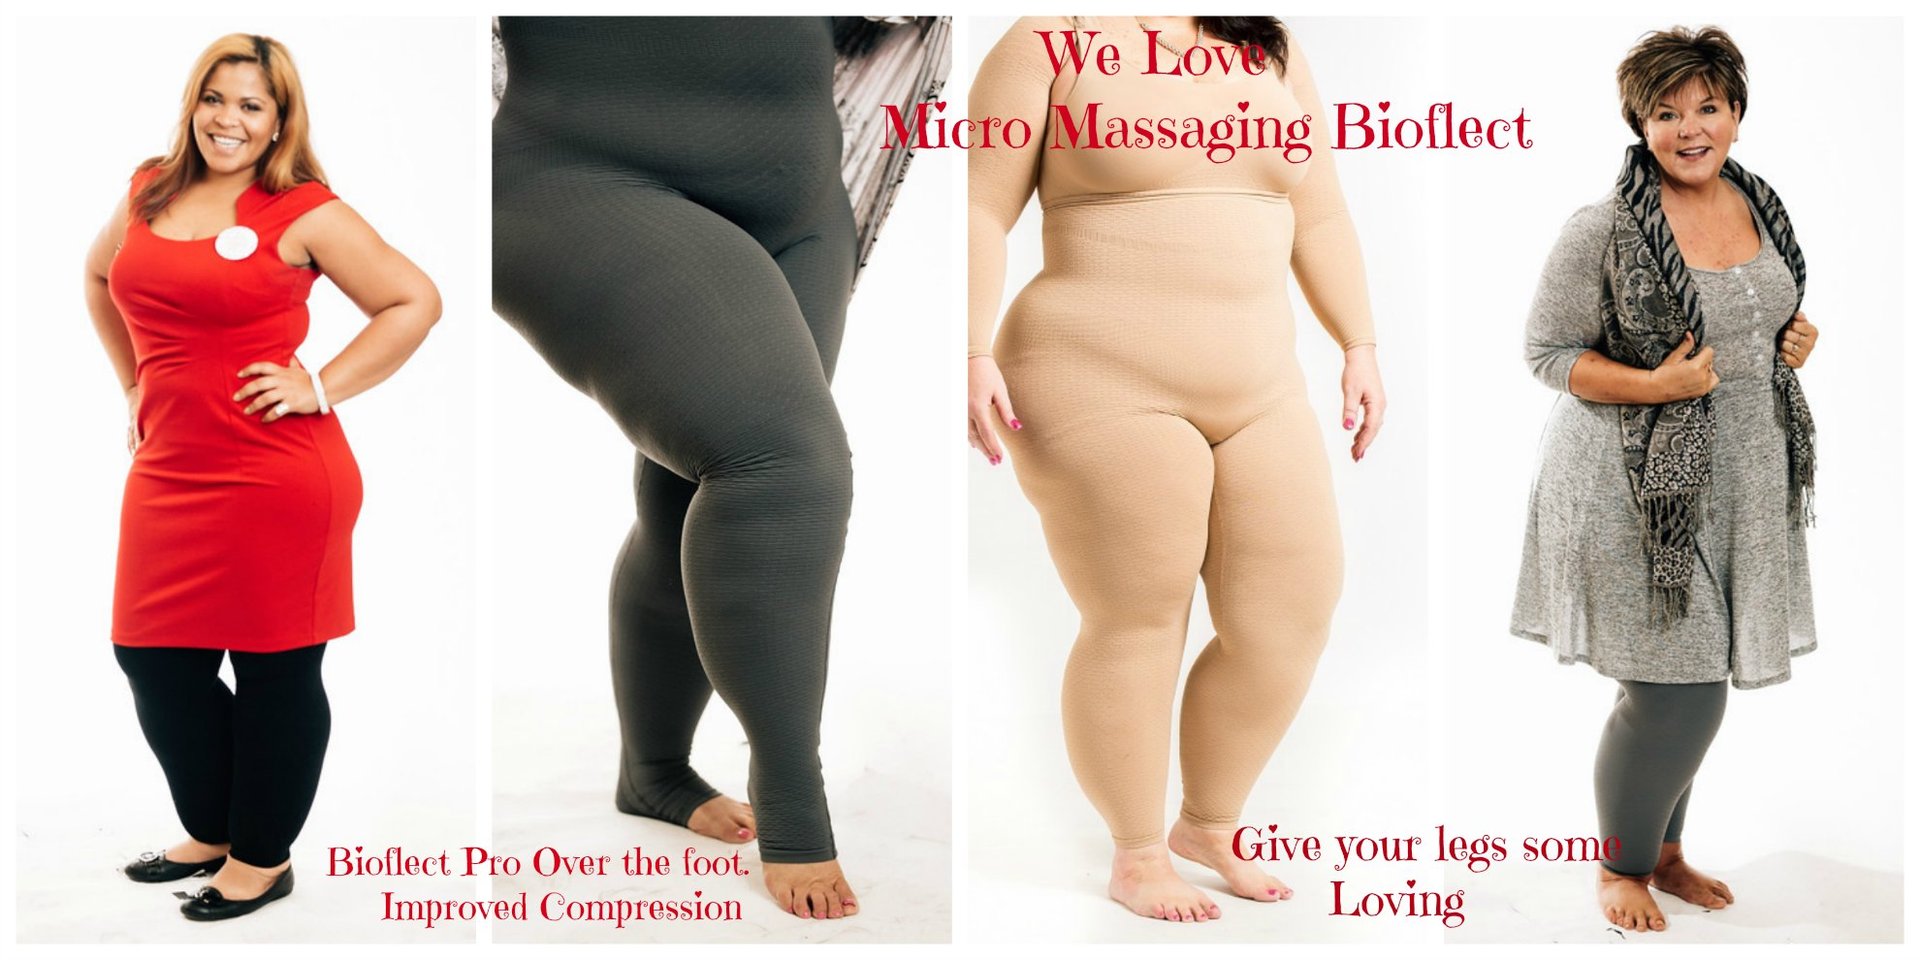 Products For Lipedema, Edema, Focusing On Plus Sizes – Lipedema Products